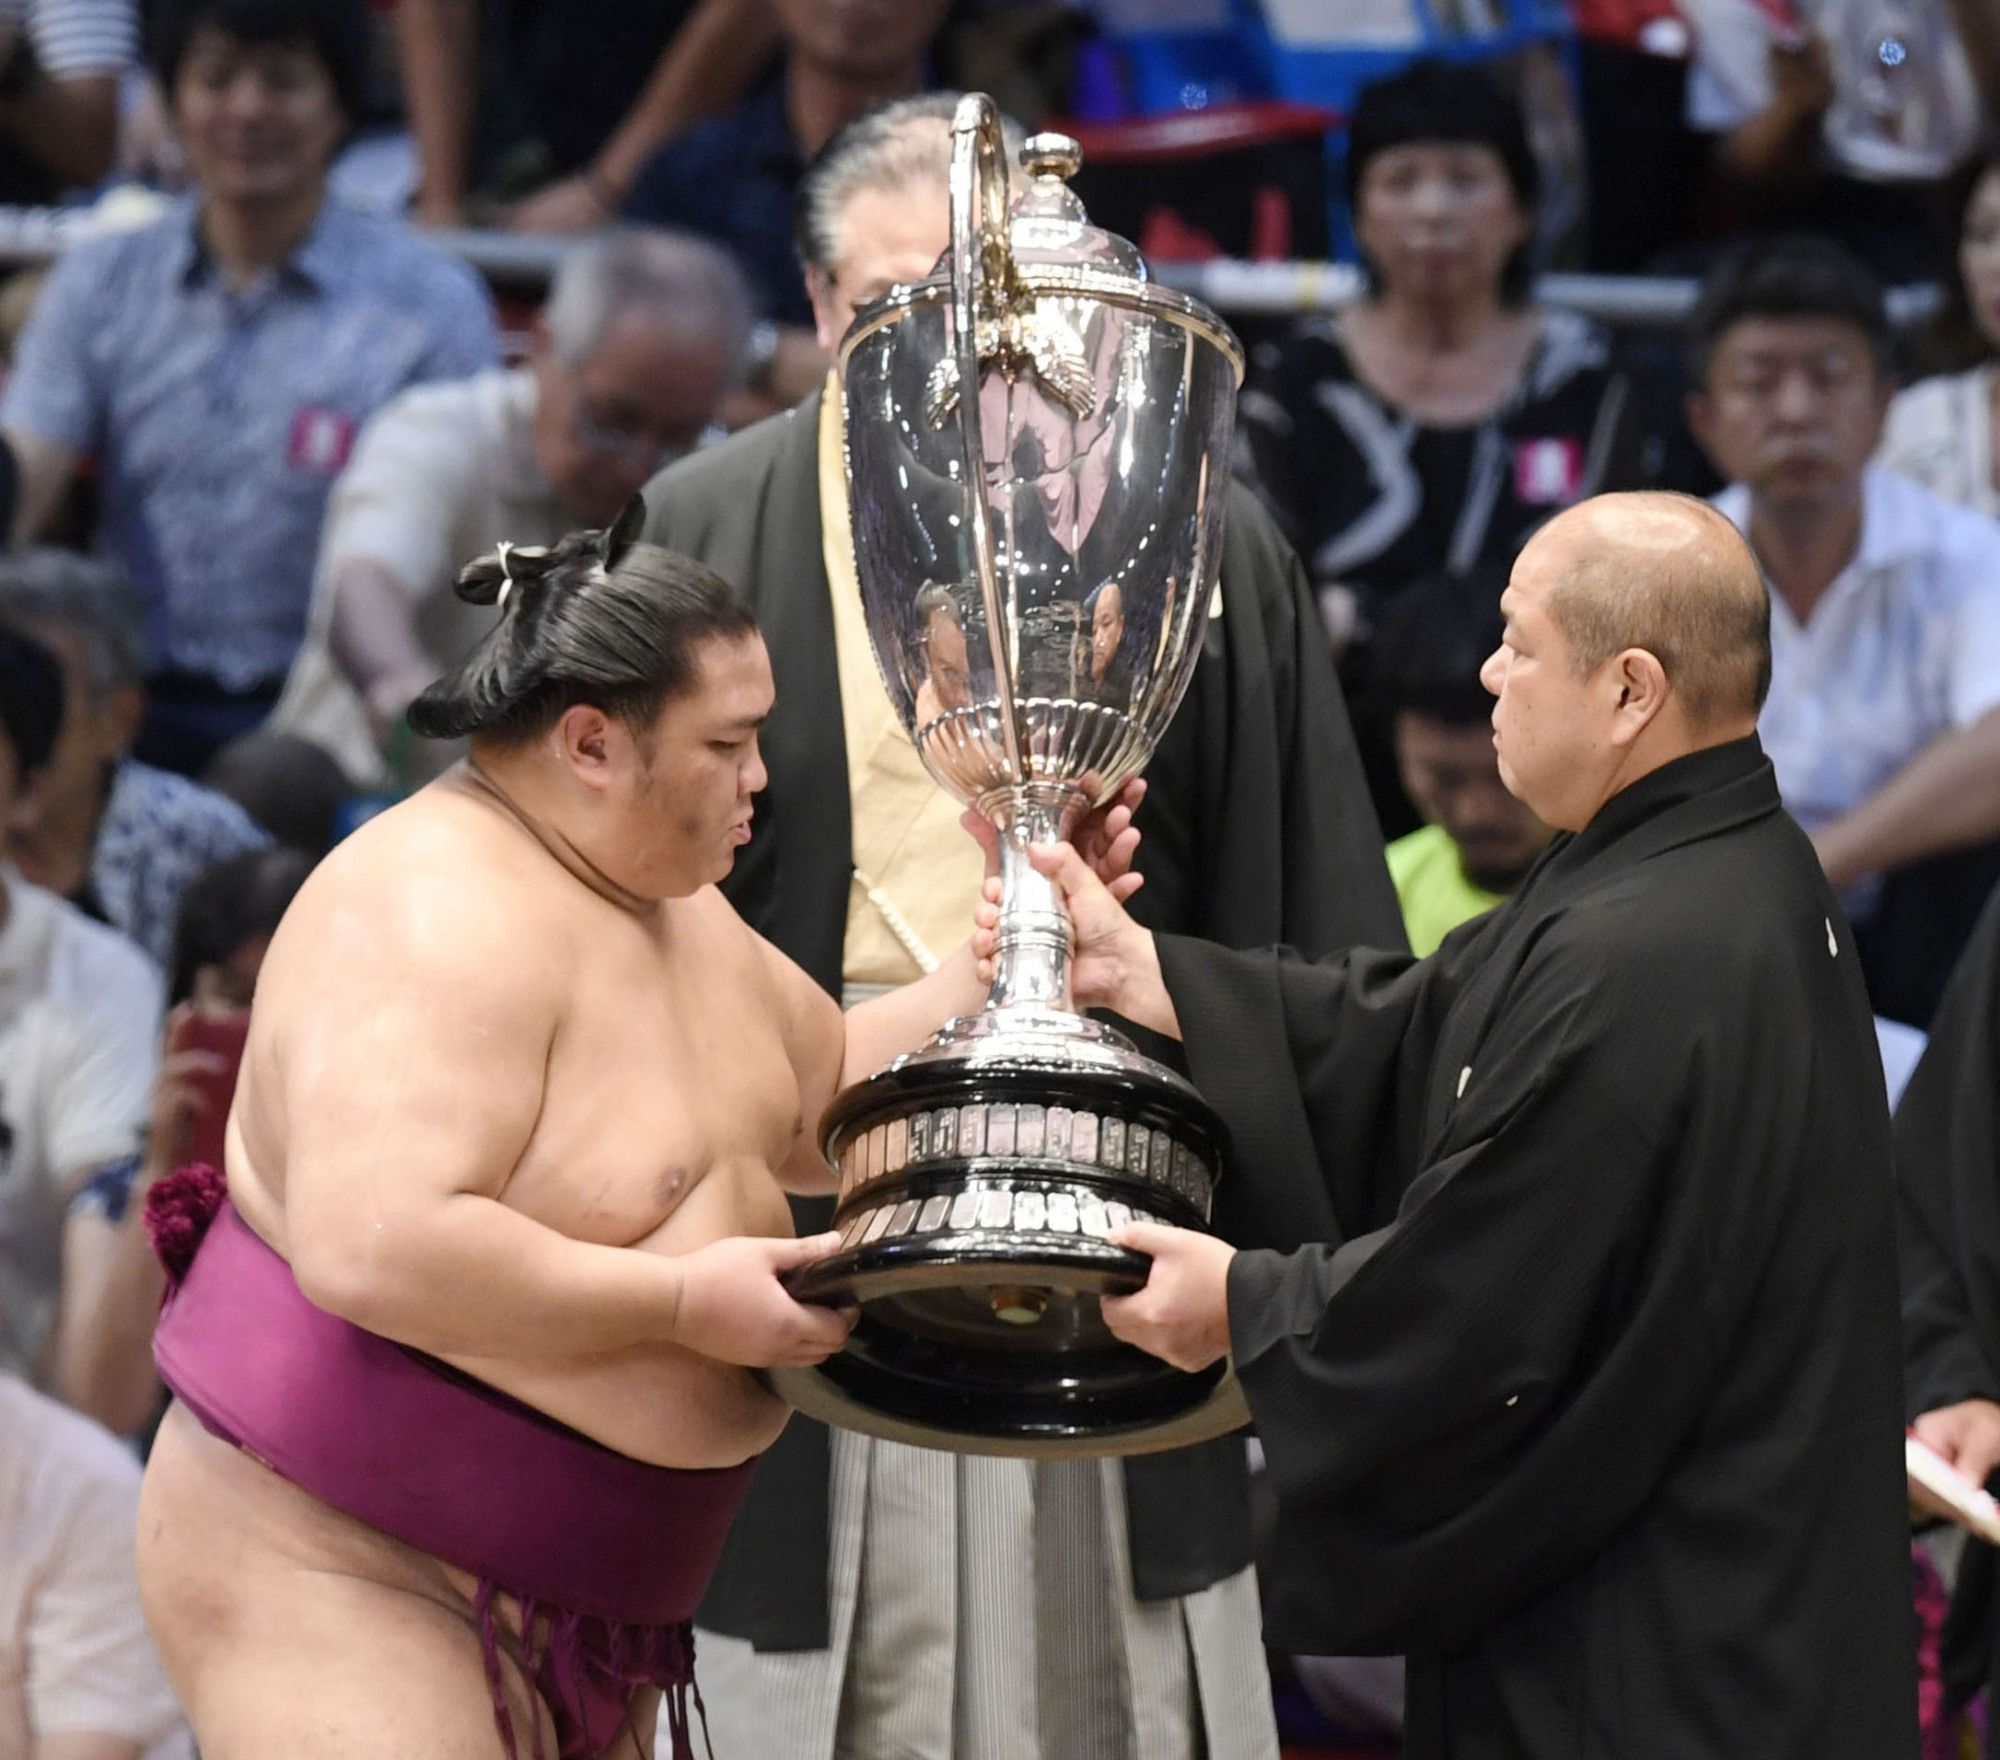 The 30-kg Emperor's Cup is awarded to the winner of each sumo tournament. | KYODO